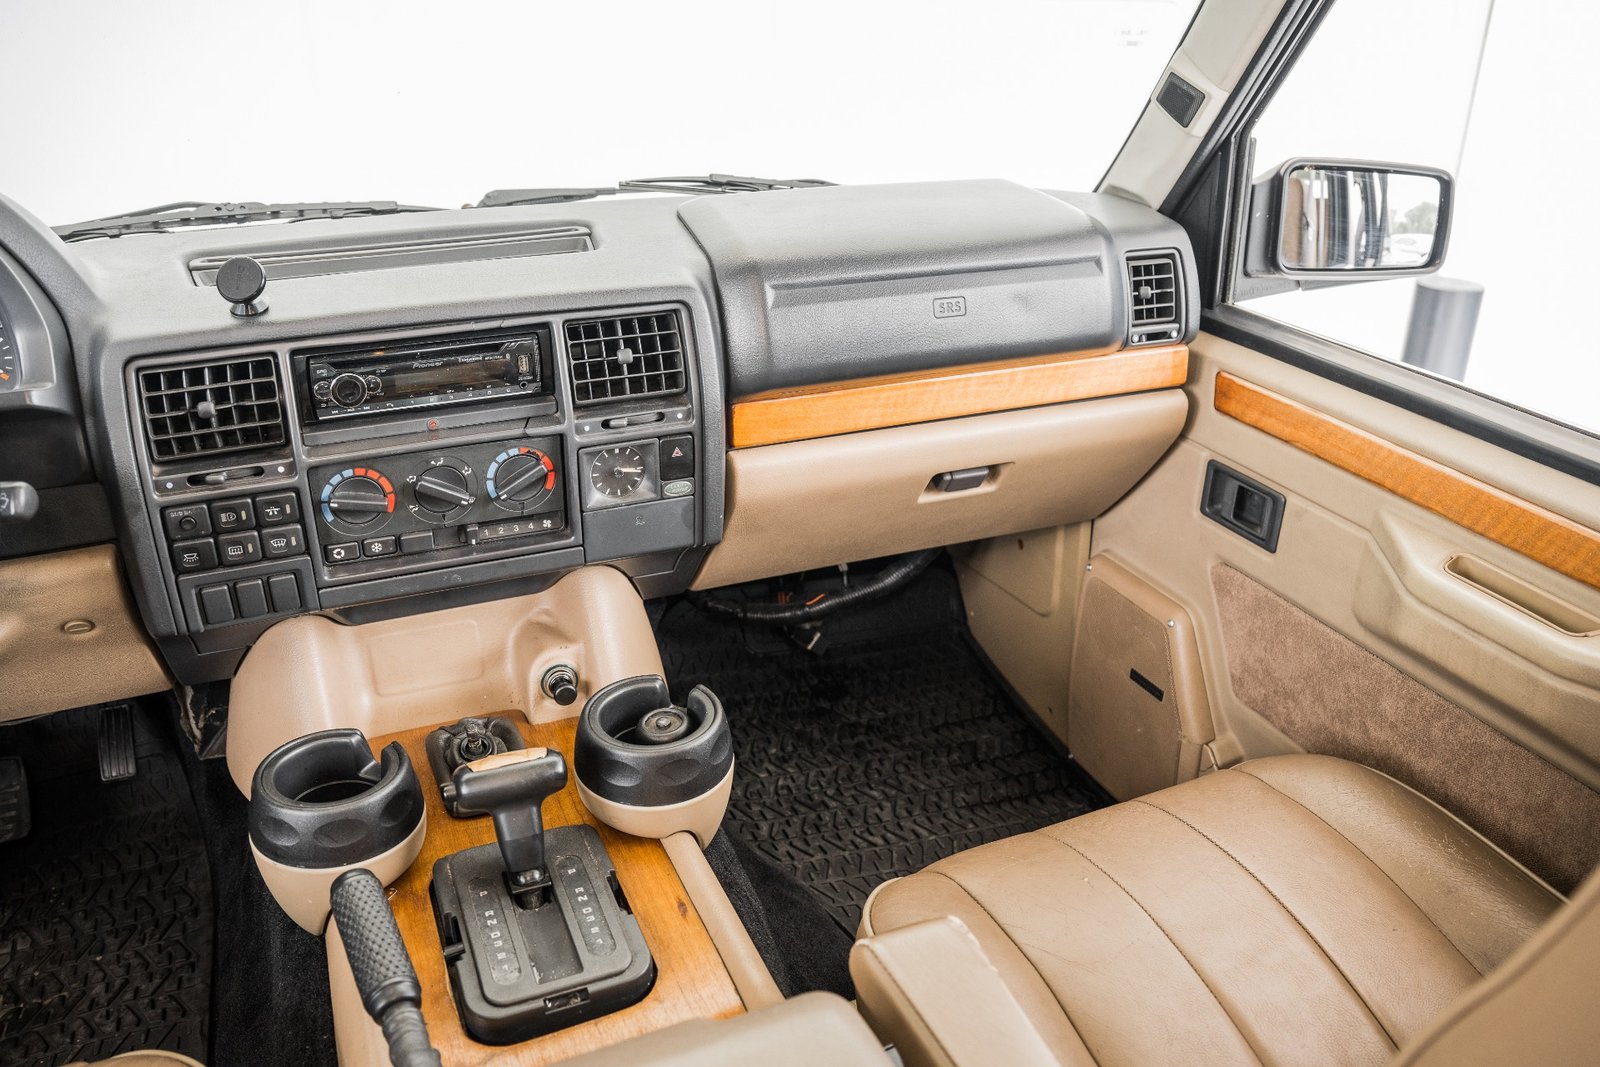 Used 1995 RANGE ROVER COUNTY CLASSIC (15)